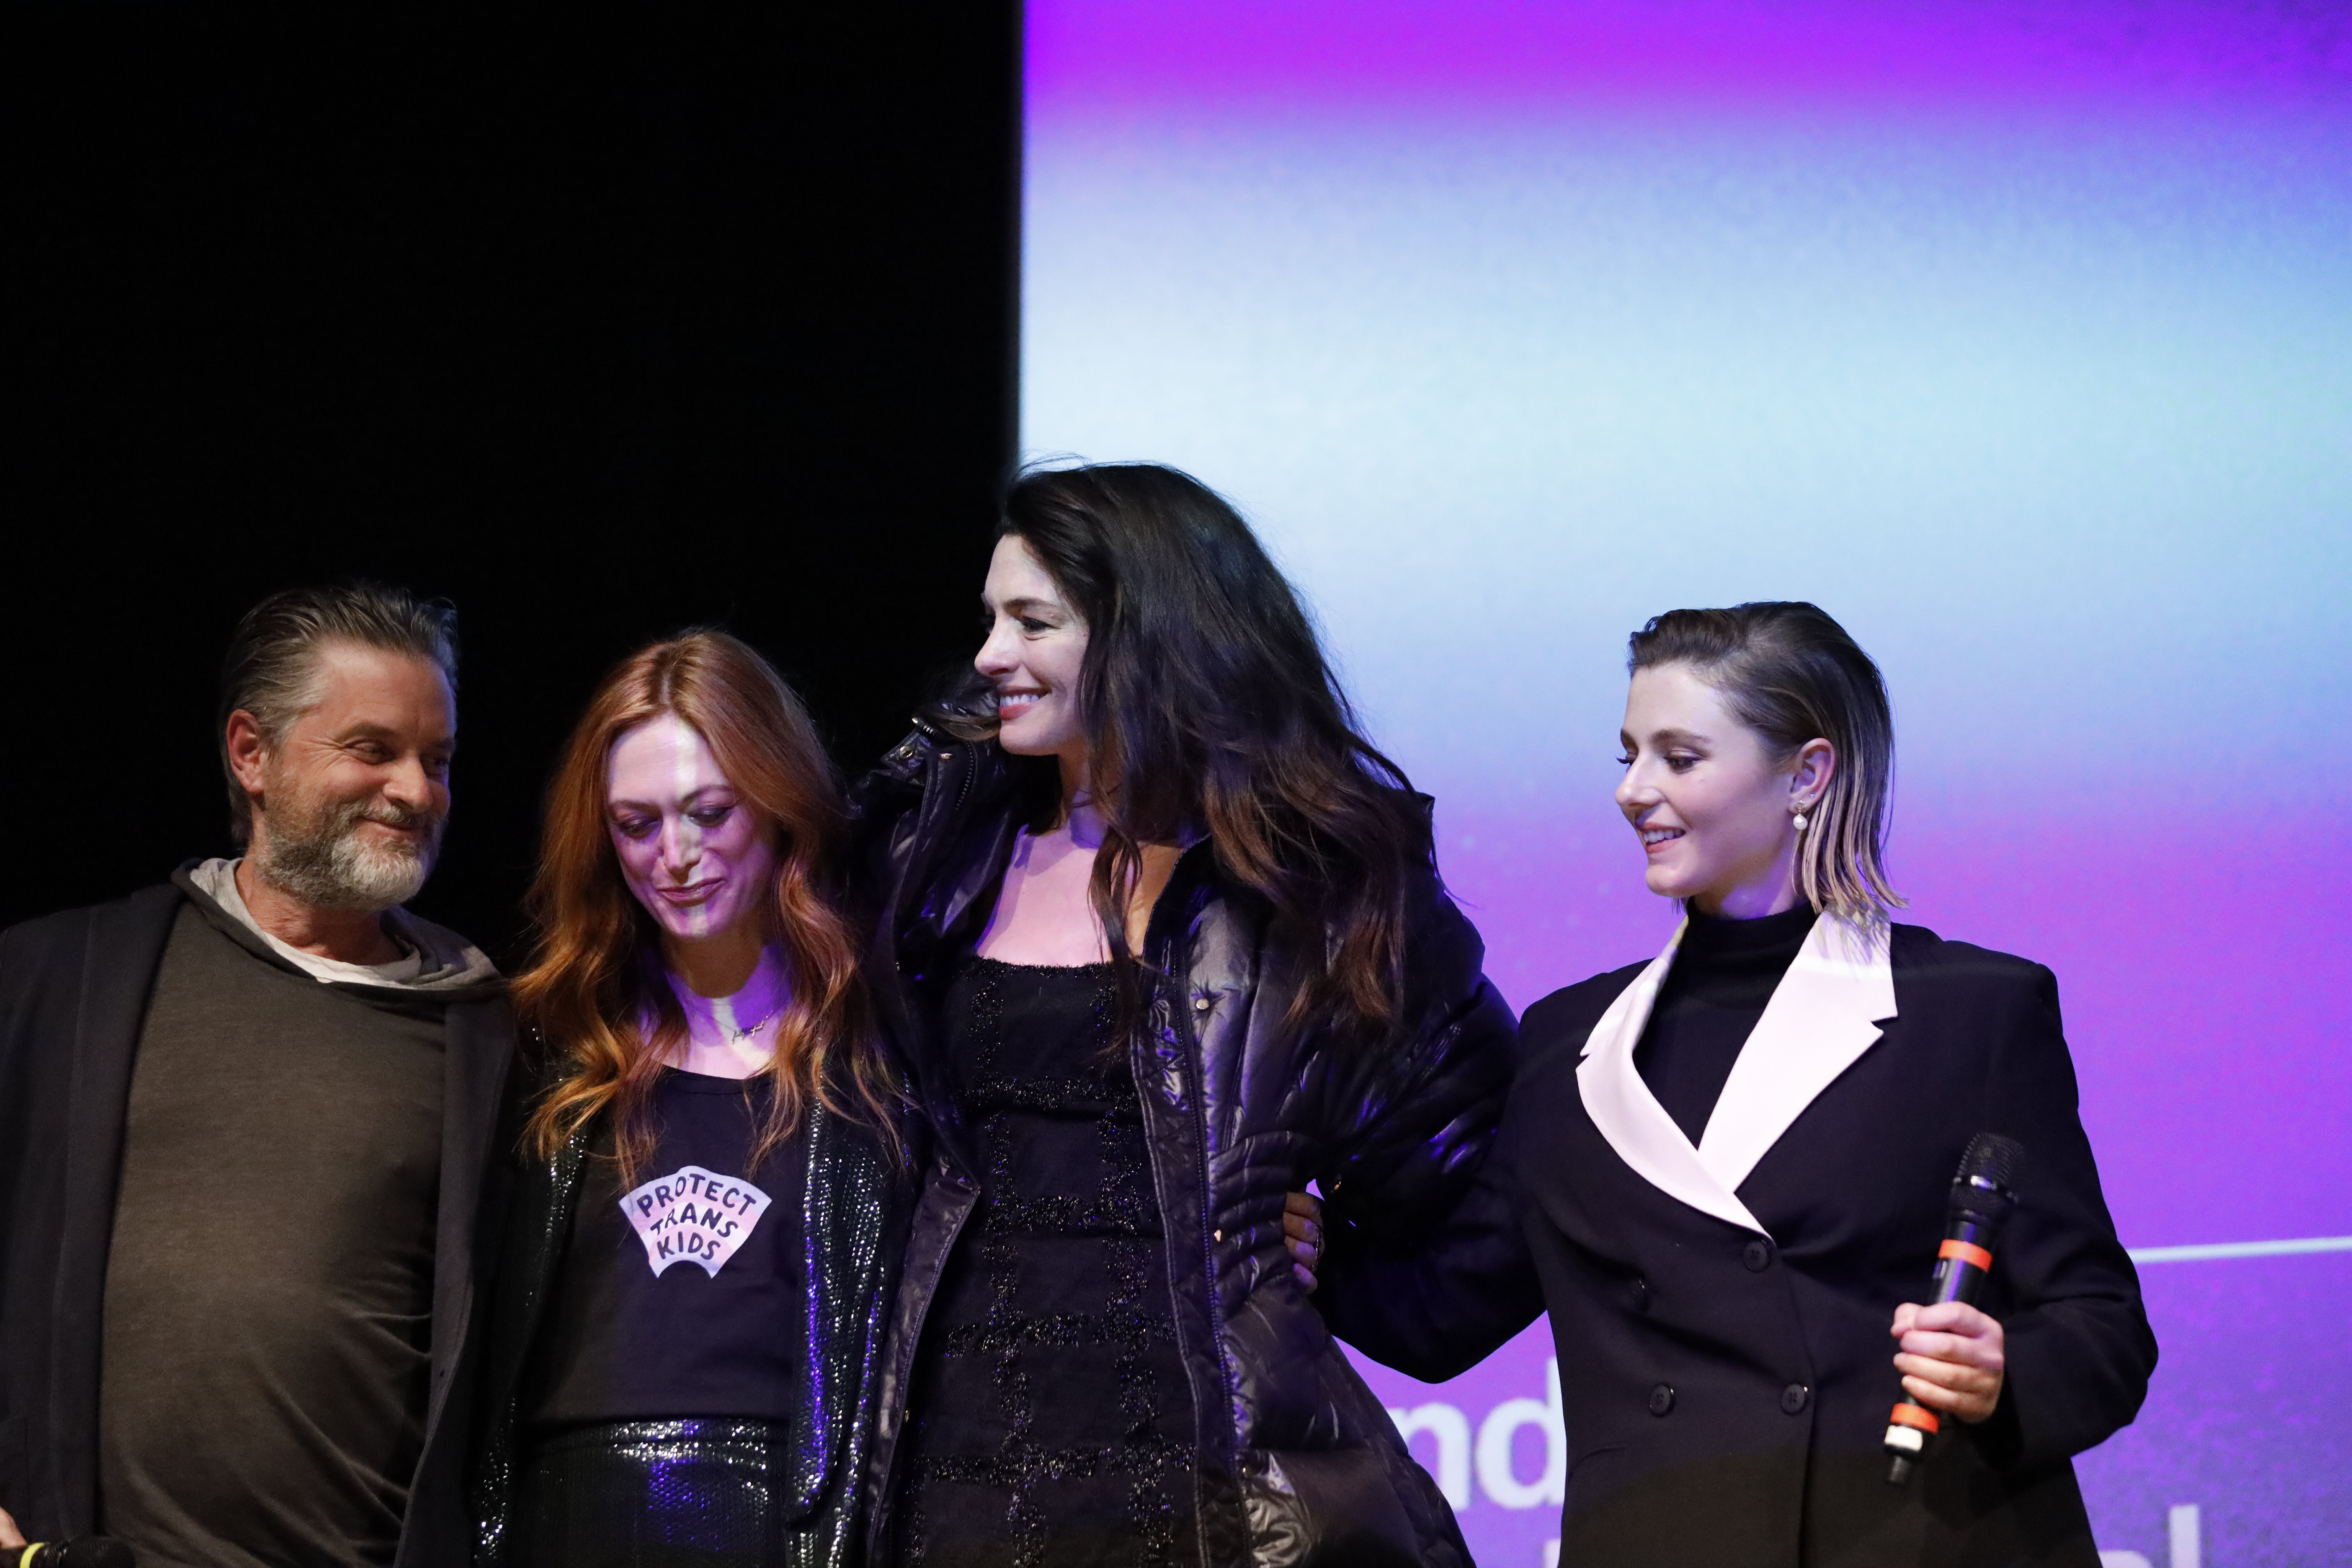 Anne Hathaway and cast at Sundance premiere